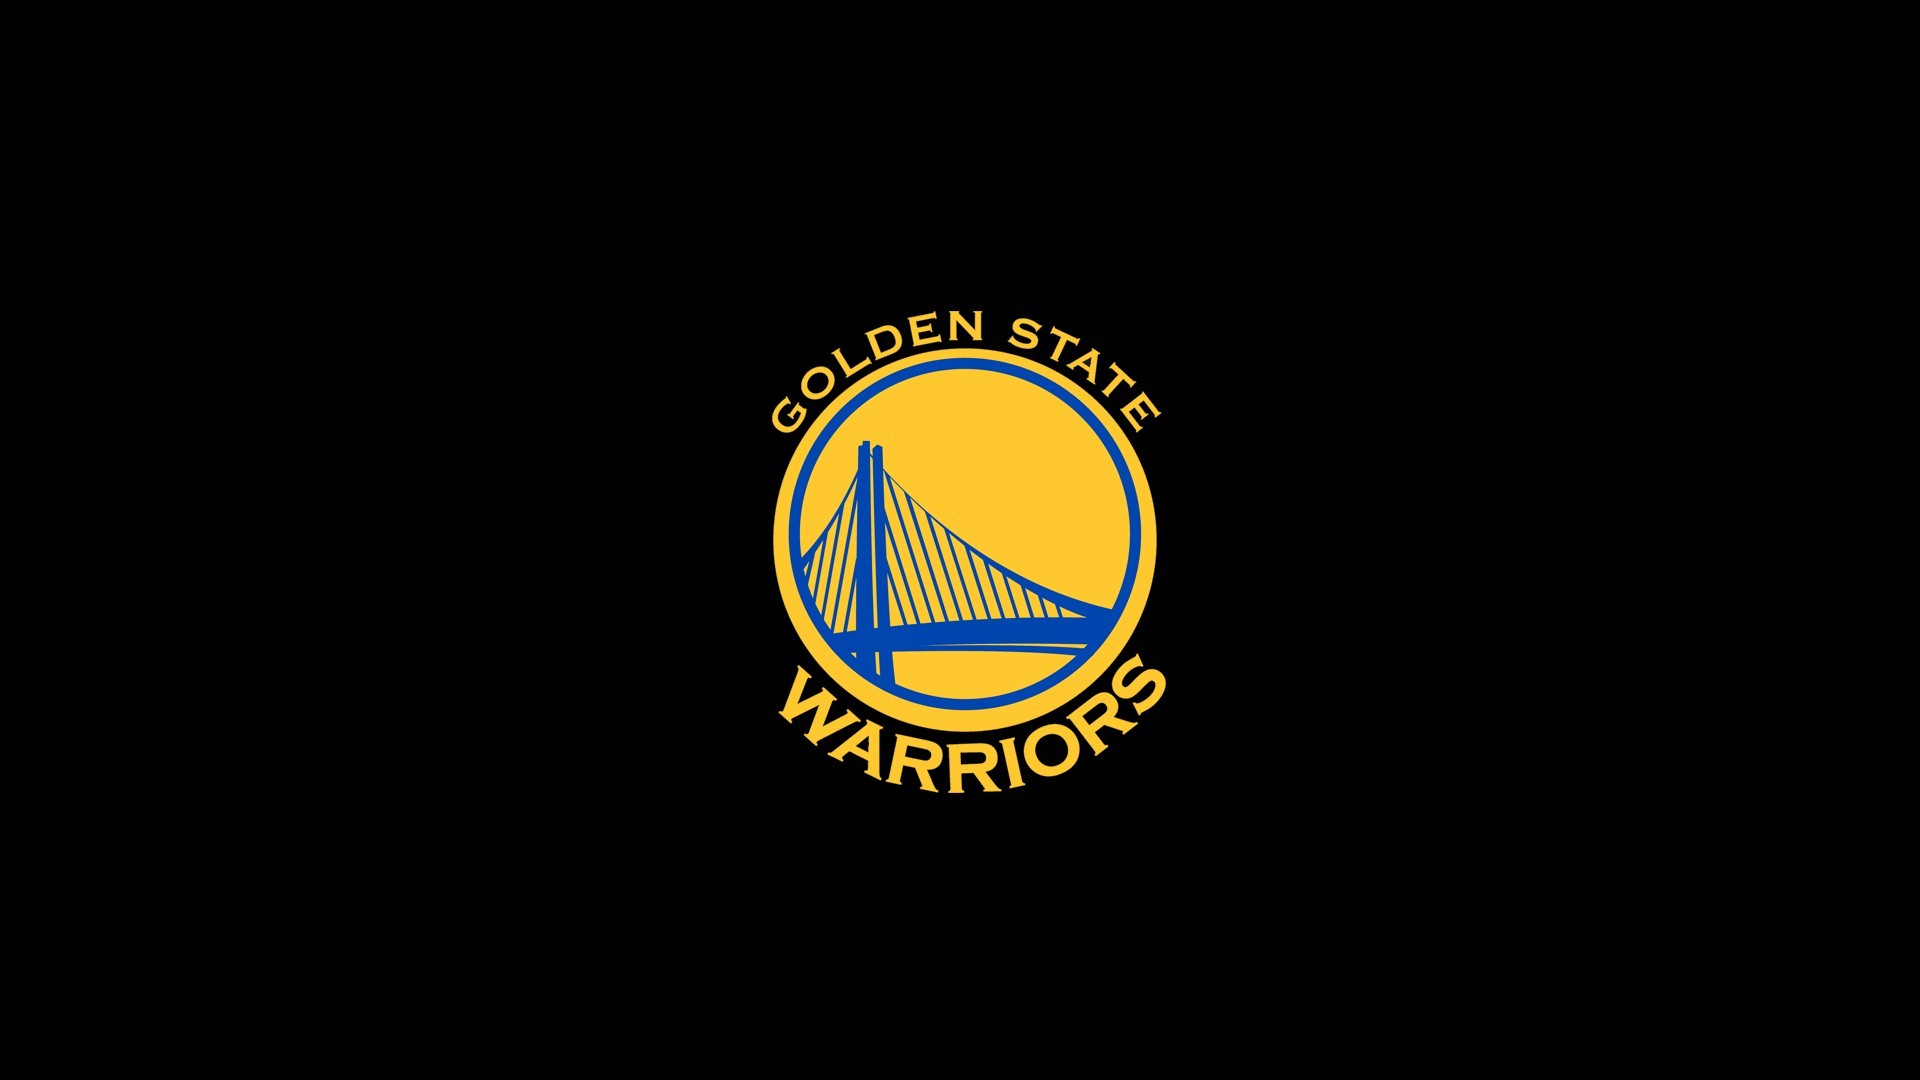 1920x1080 Golden State Warriors Logo Desktop Wallpapers with image dimensions   pixel. You can make this